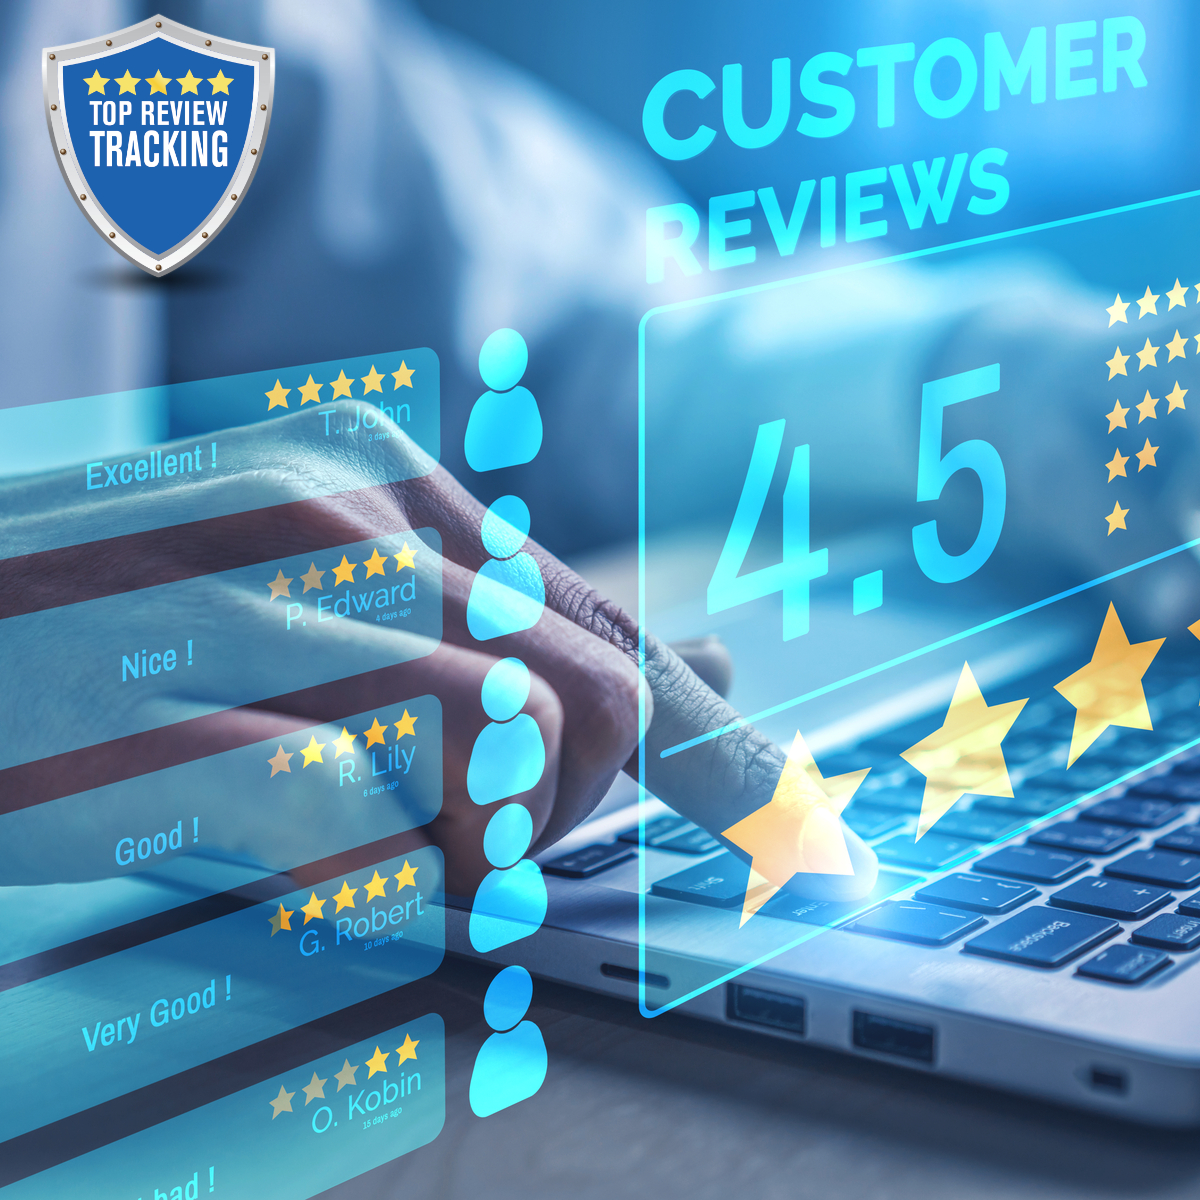 Have You Been Wondering About Using A Review Tracking System?